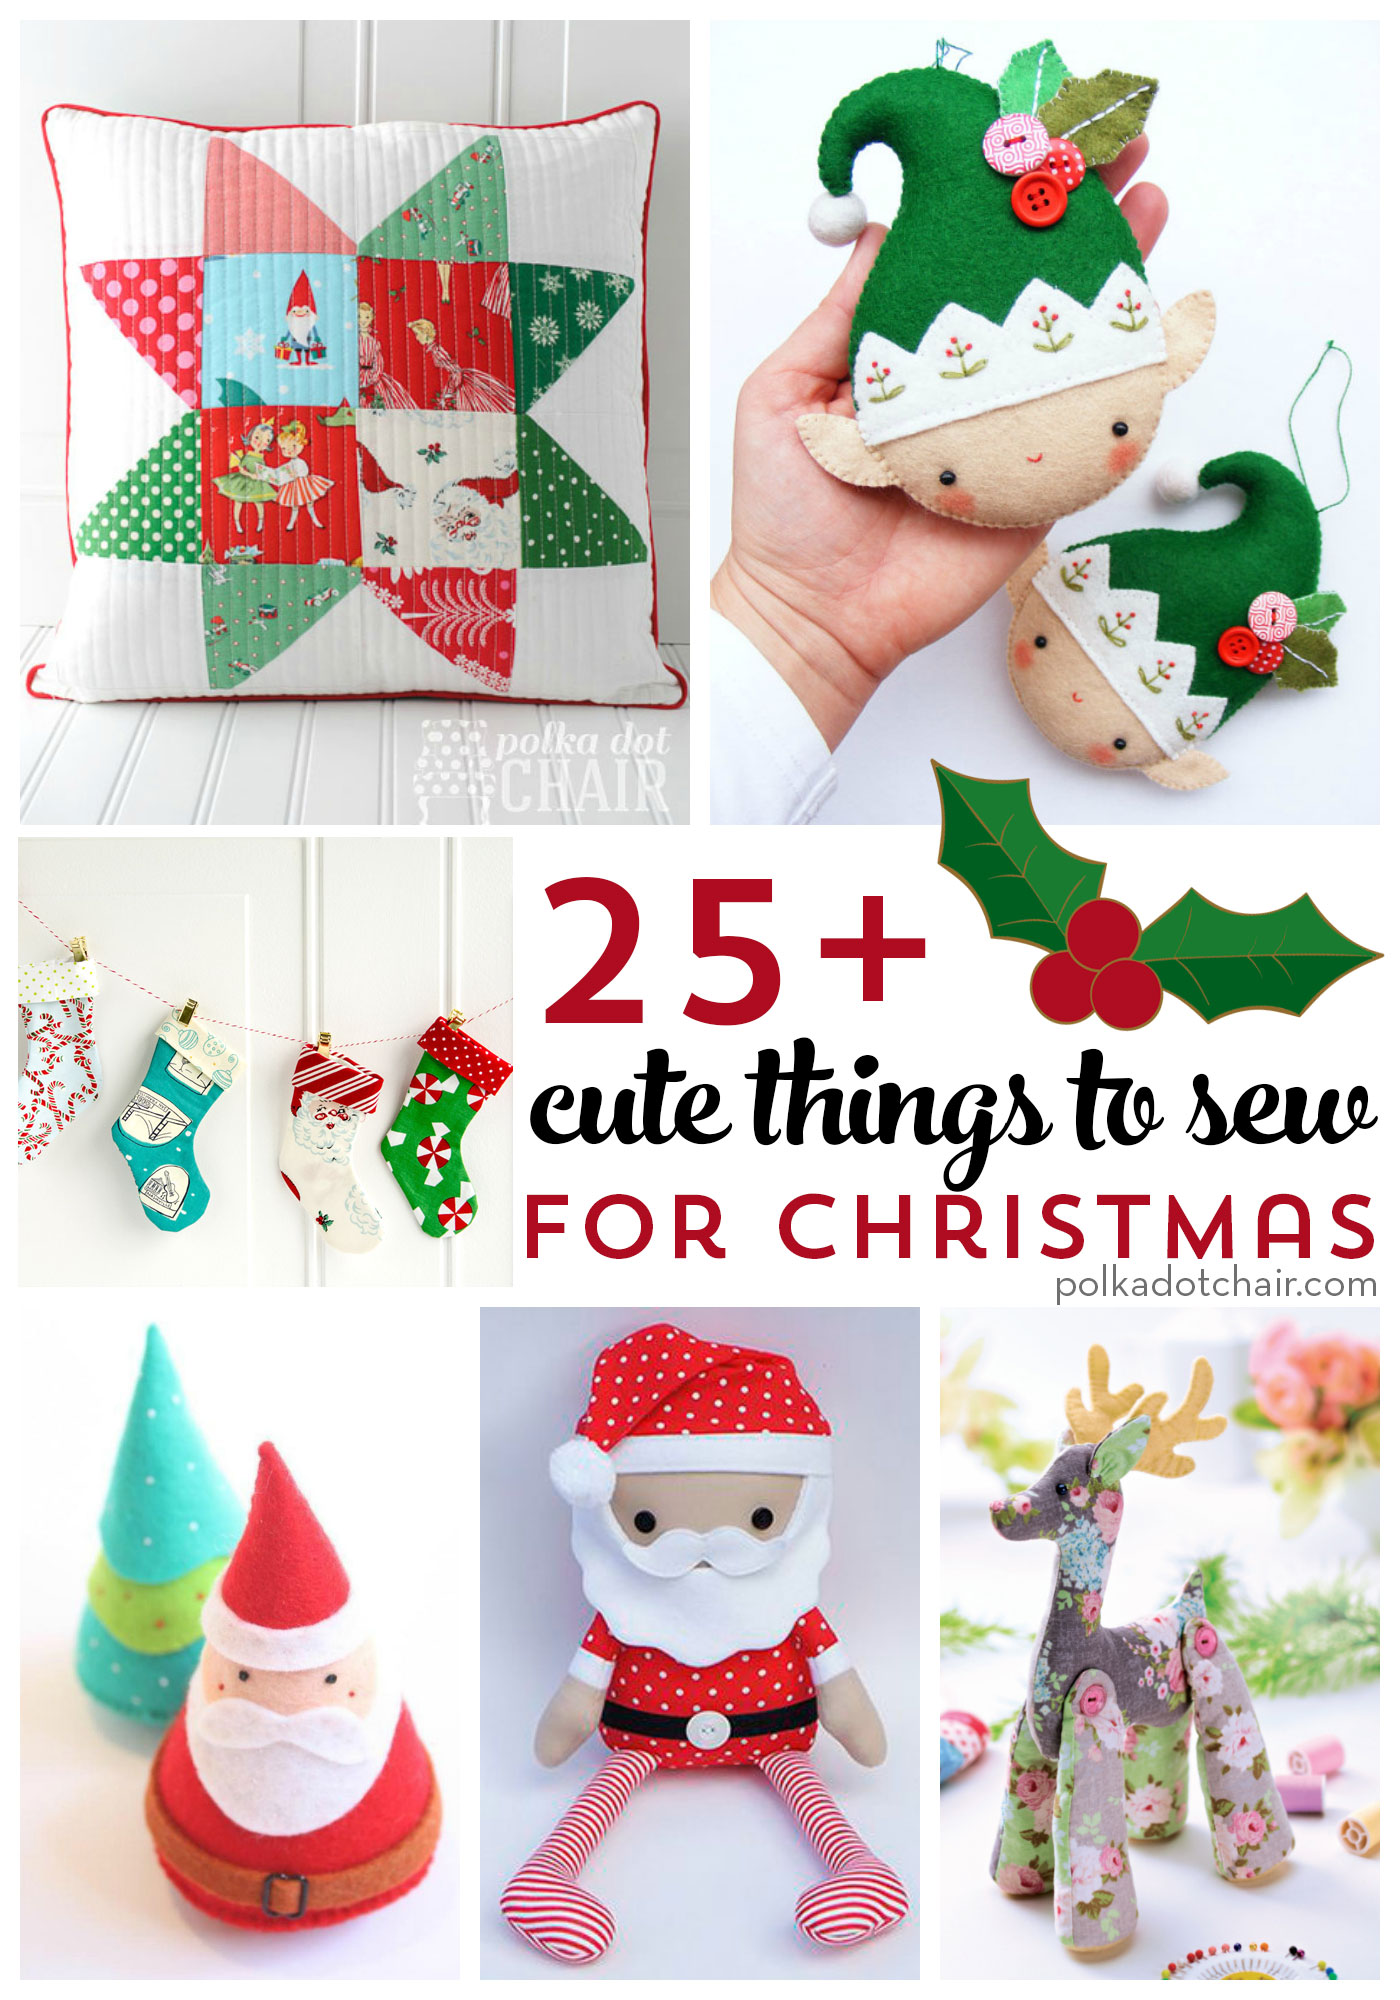 More than 25 Cute Things to Sew for Christmas  The Polka Dot Chair